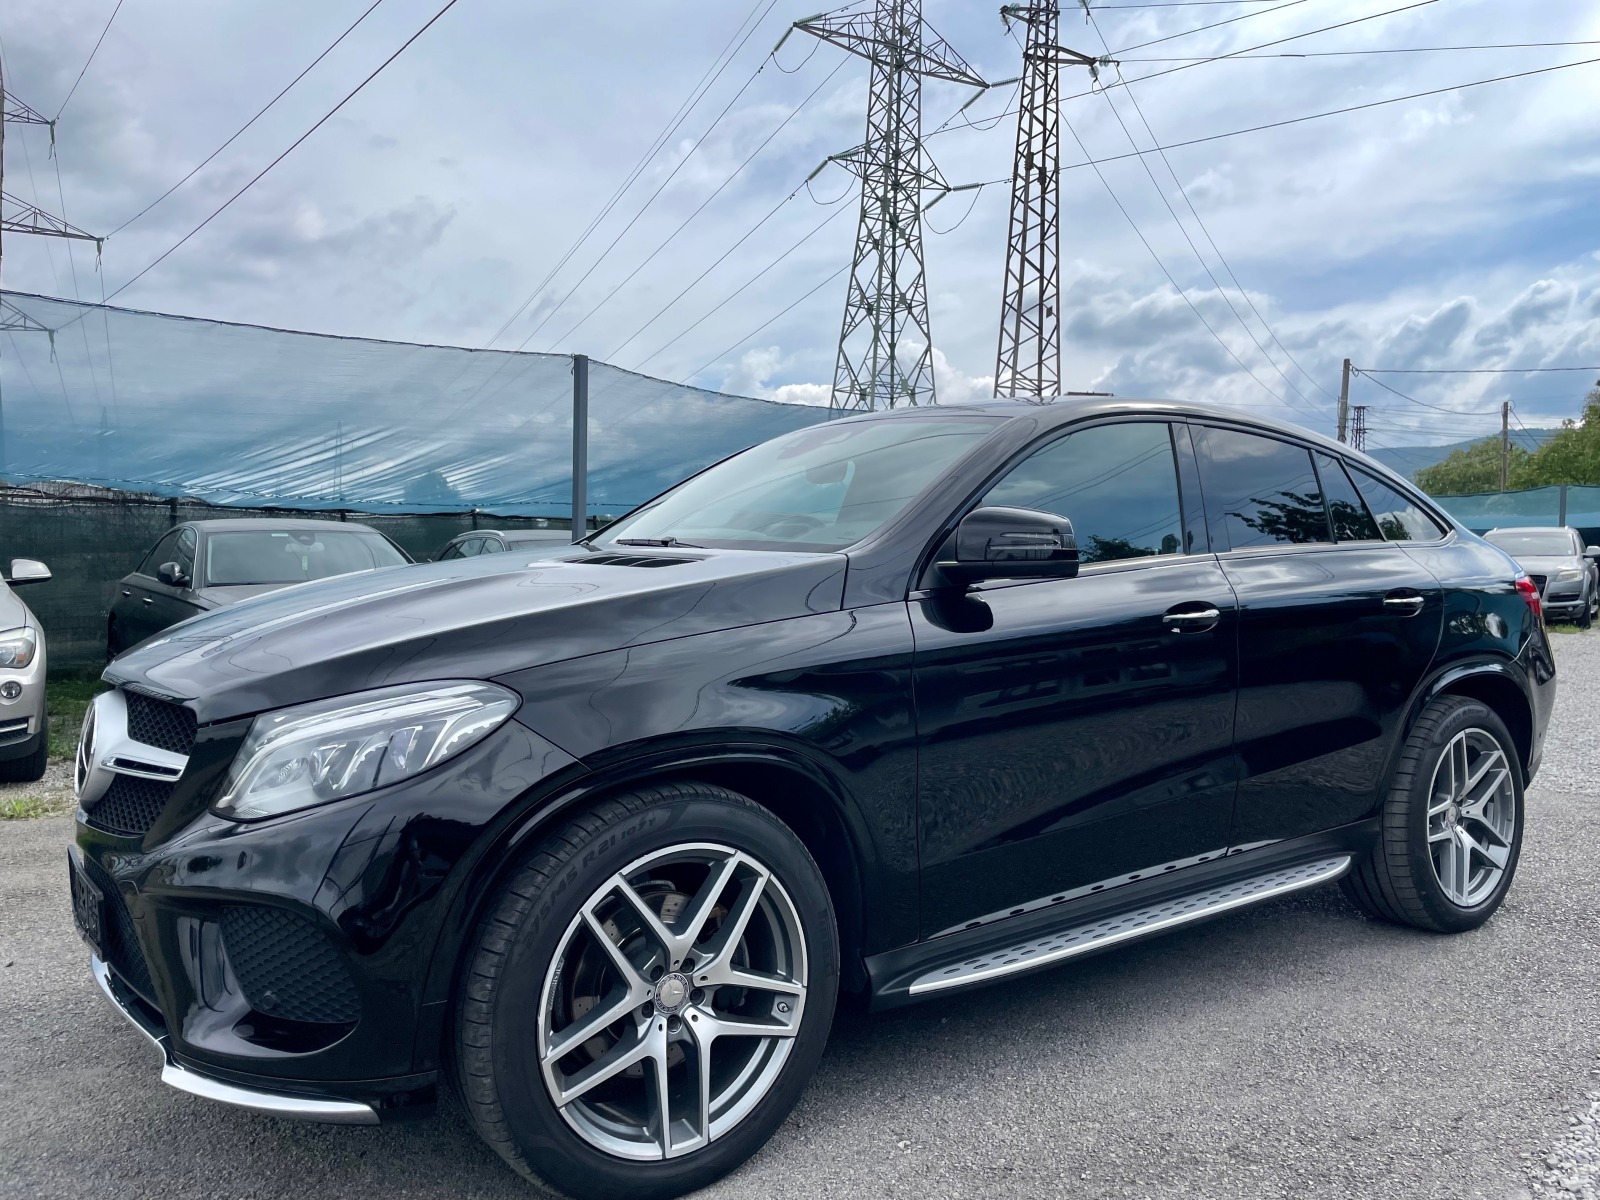 Mercedes-Benz GLE Coupe 350 d 4-MATIC/DISTRONIC/PANORAMA/9-G TRONIC/360  - изображение 1